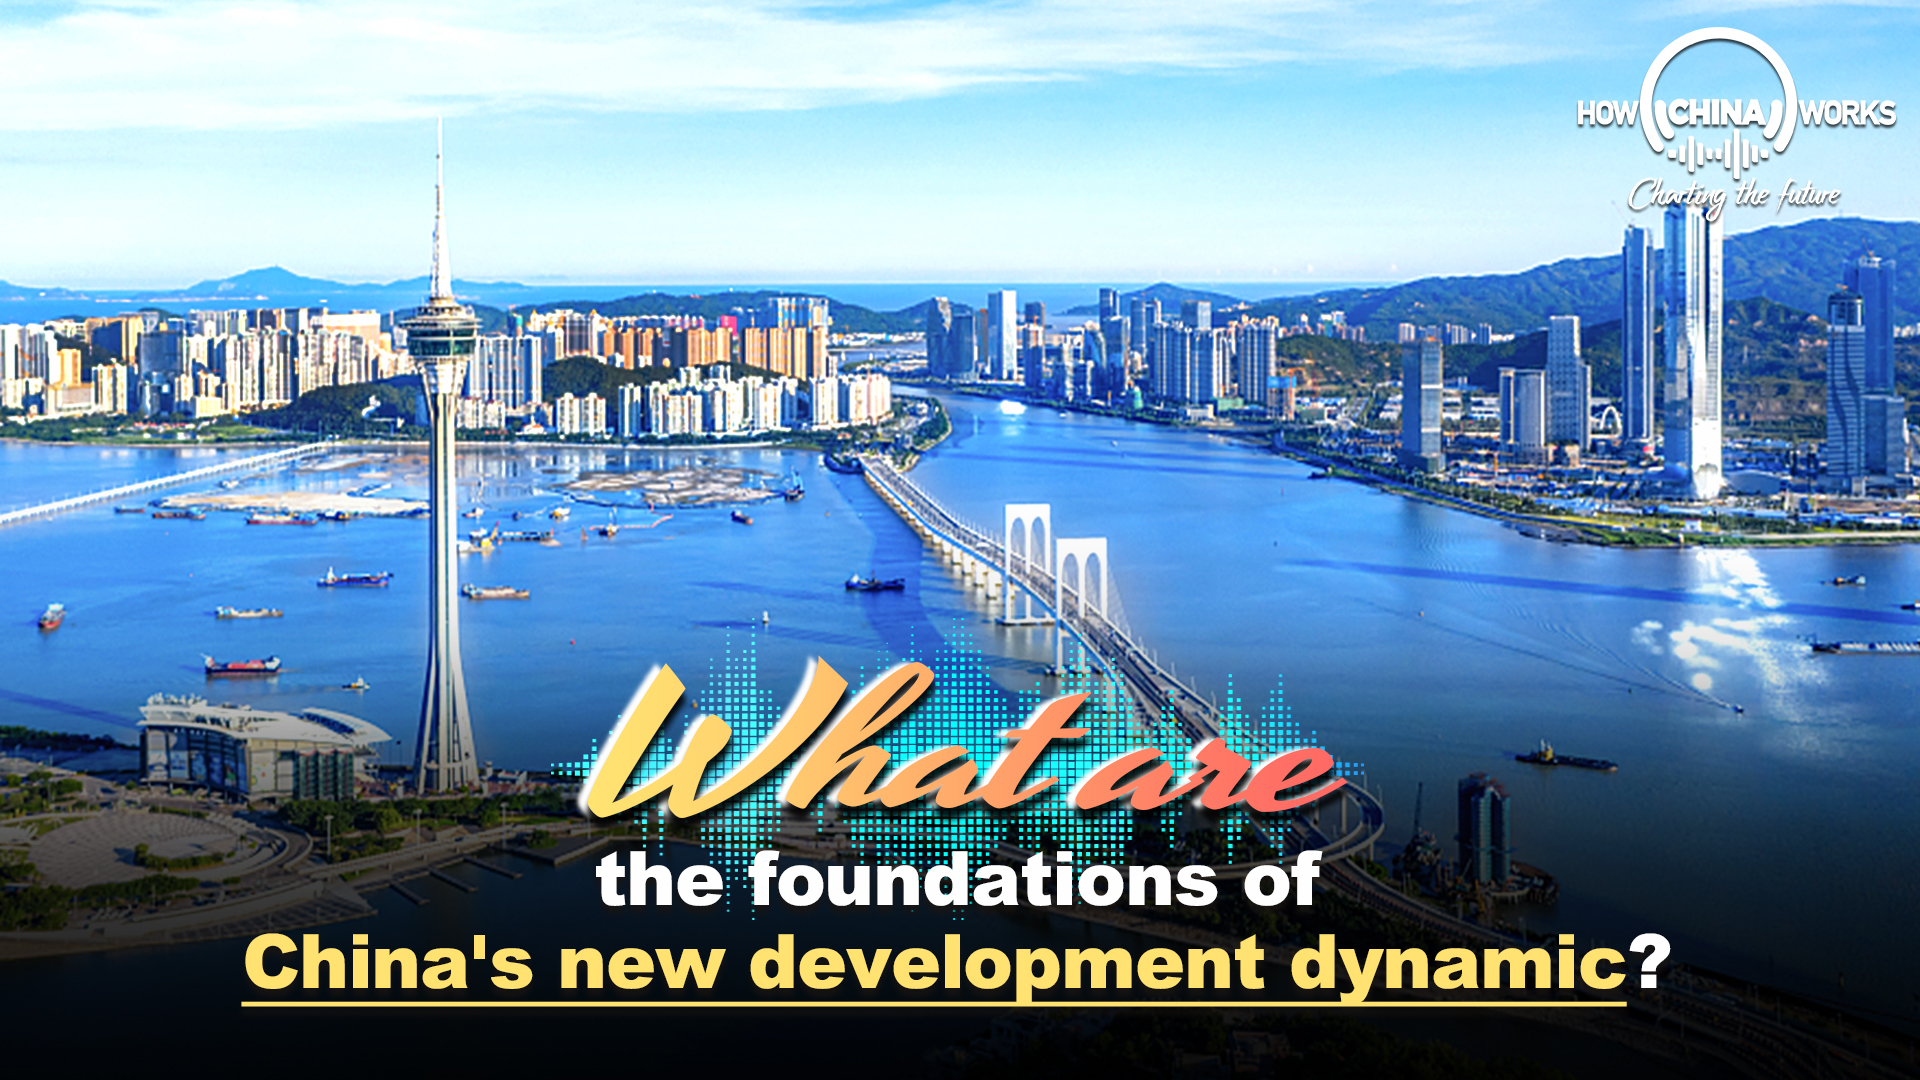 What are the foundations of China's new development dynamic?